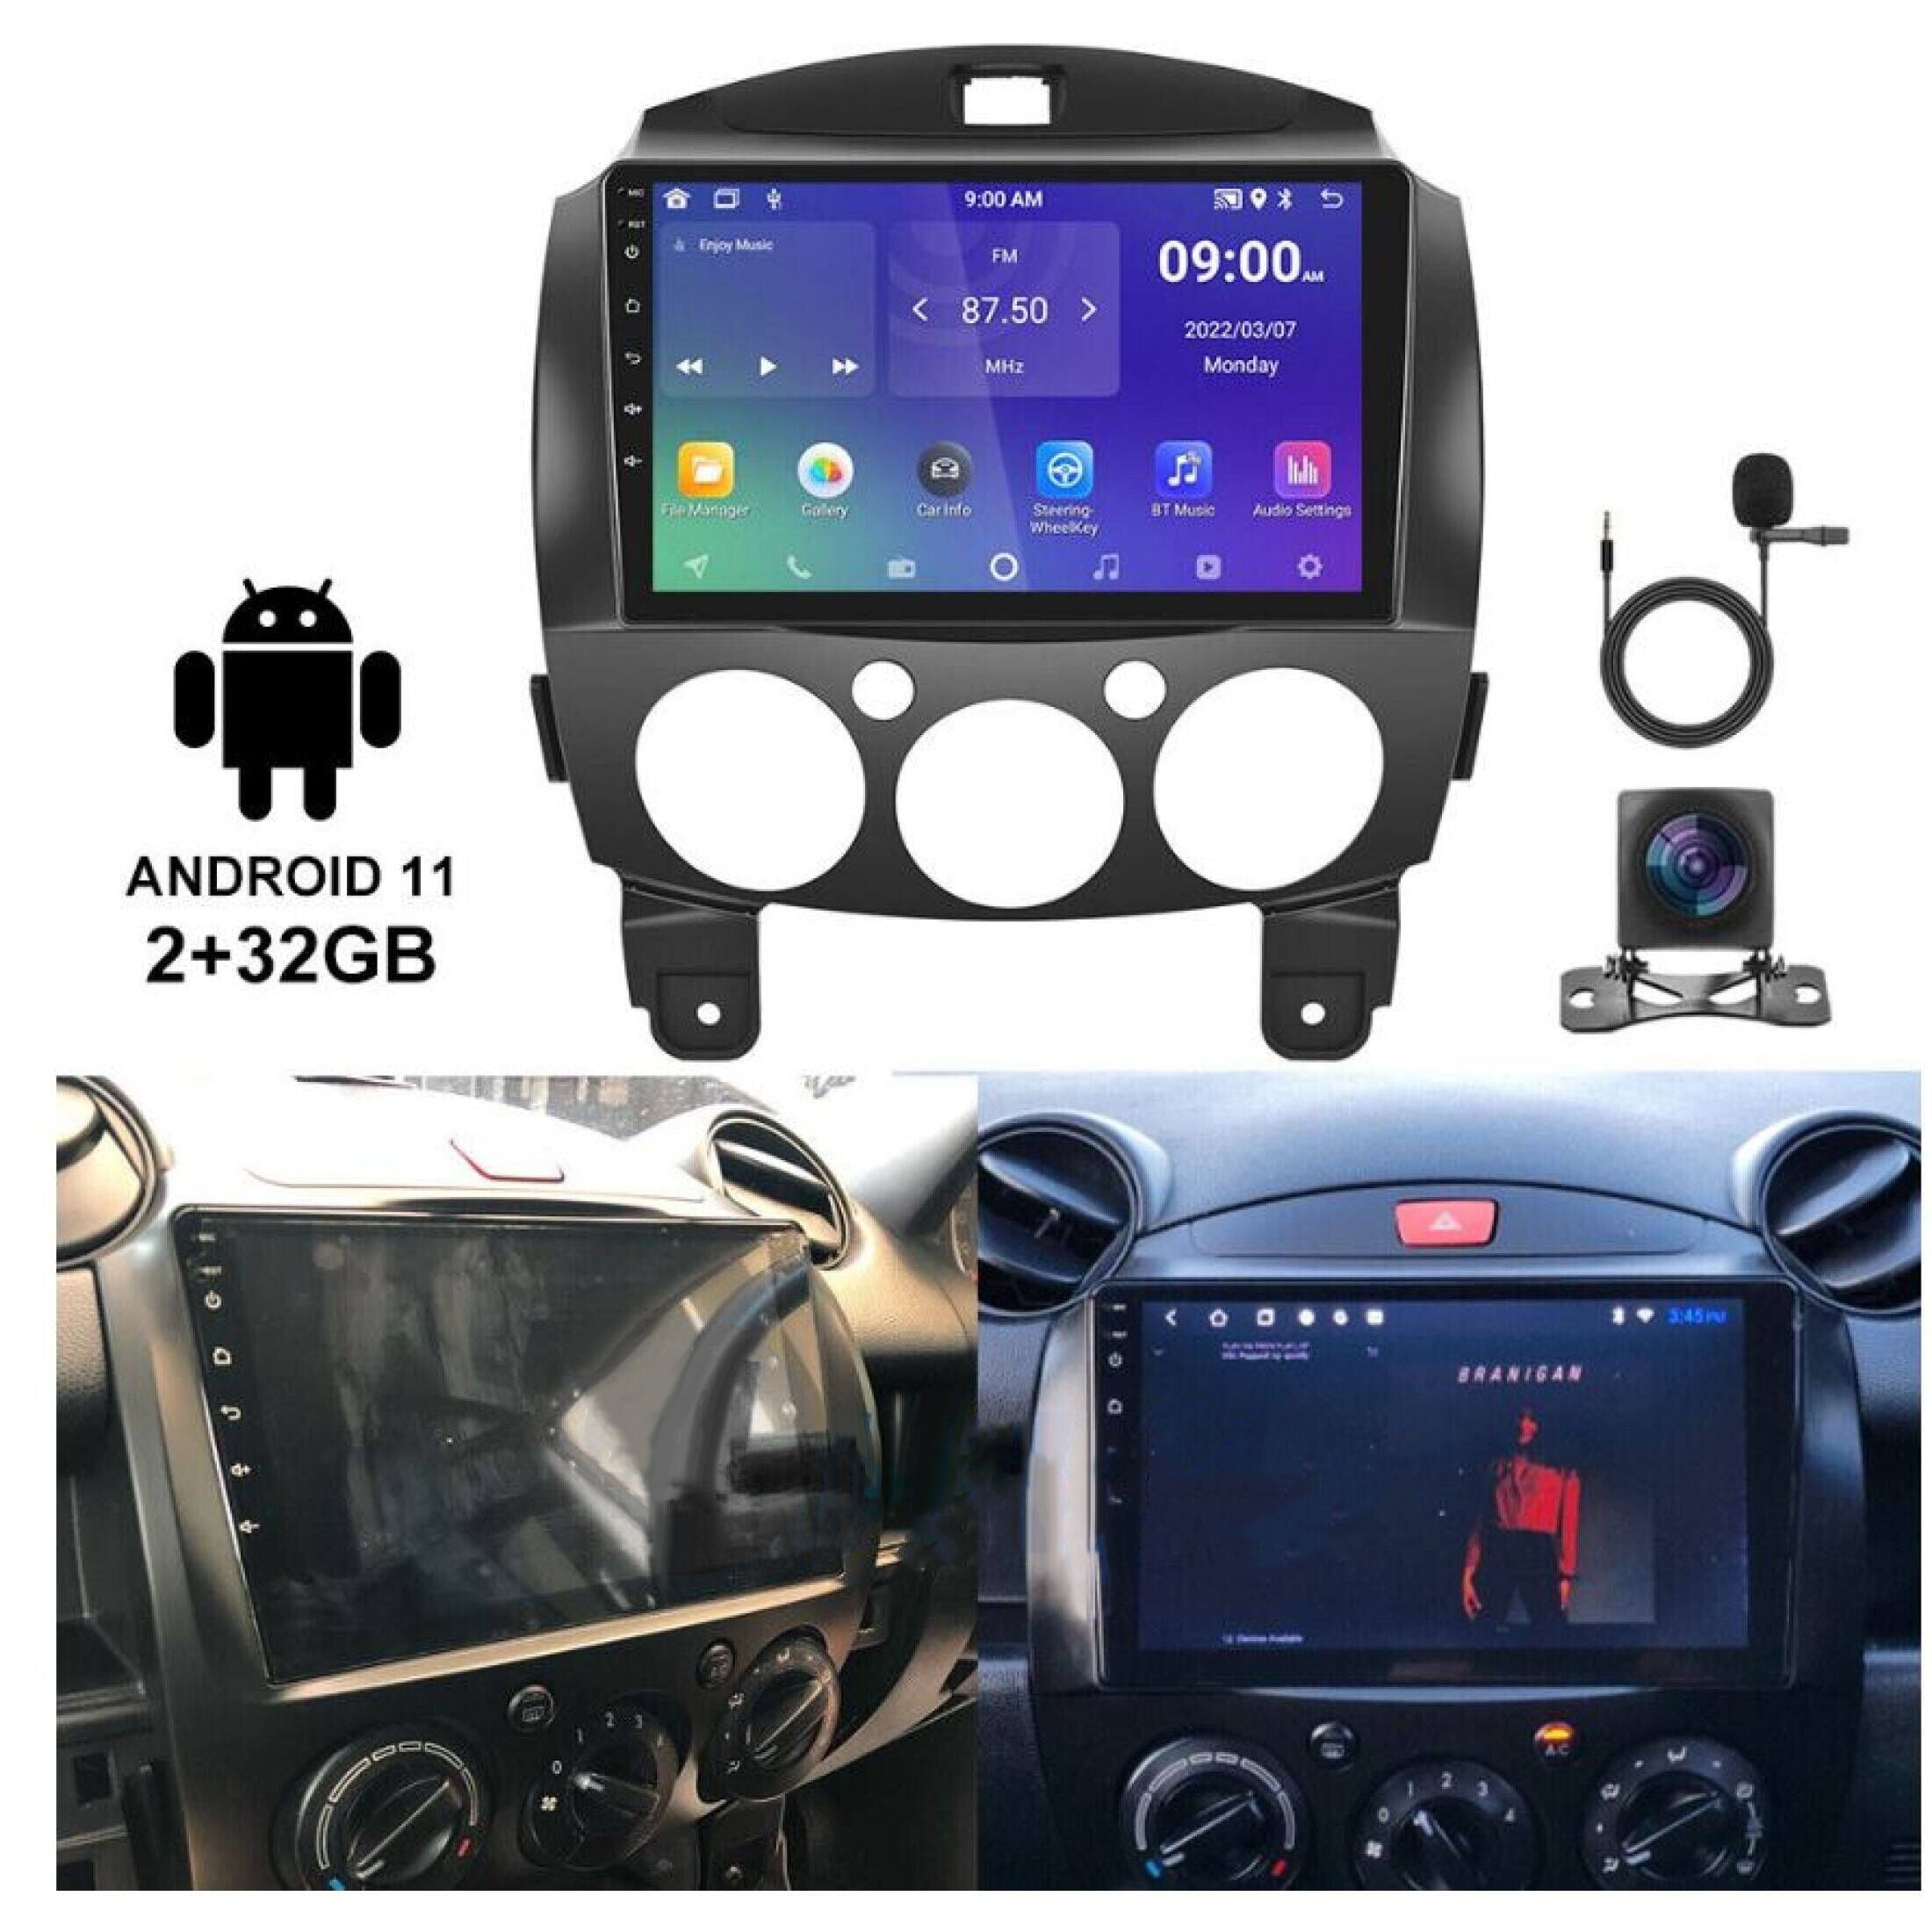 2+32G] Android 12 Car Stereo for Mazda 2 2007-2014 with Apple Carplay&Android Auto,9 Touch Screen Car Radio with GPS WiFi Bluetooth FM/RDS Radio SWC Dual USB/AUX-in+Backup Camera - Walmart.com